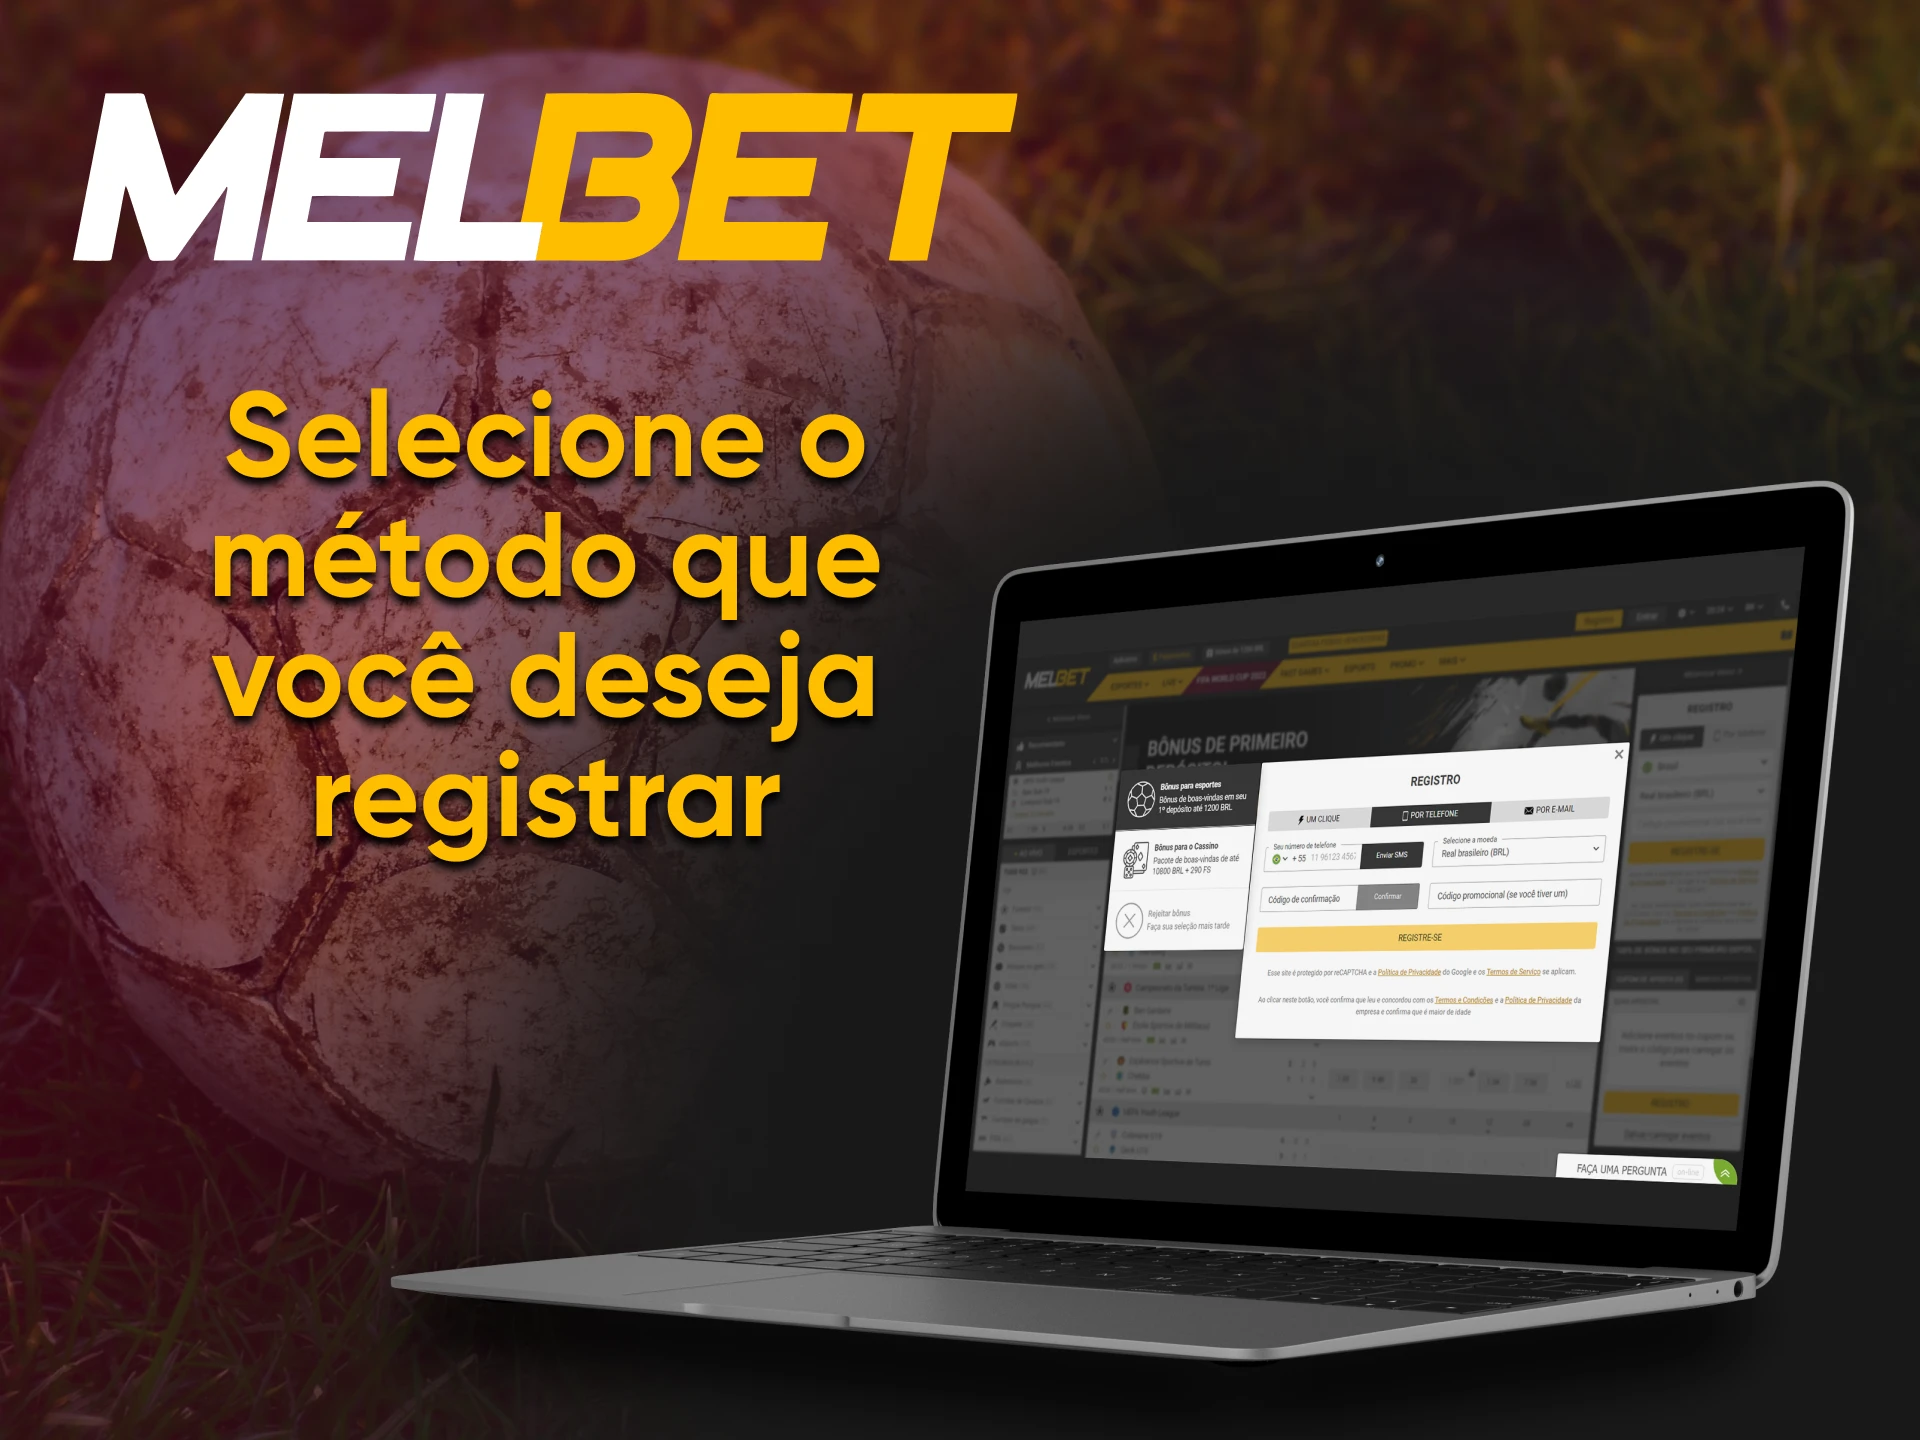 At Melbet, there are many betting options available.